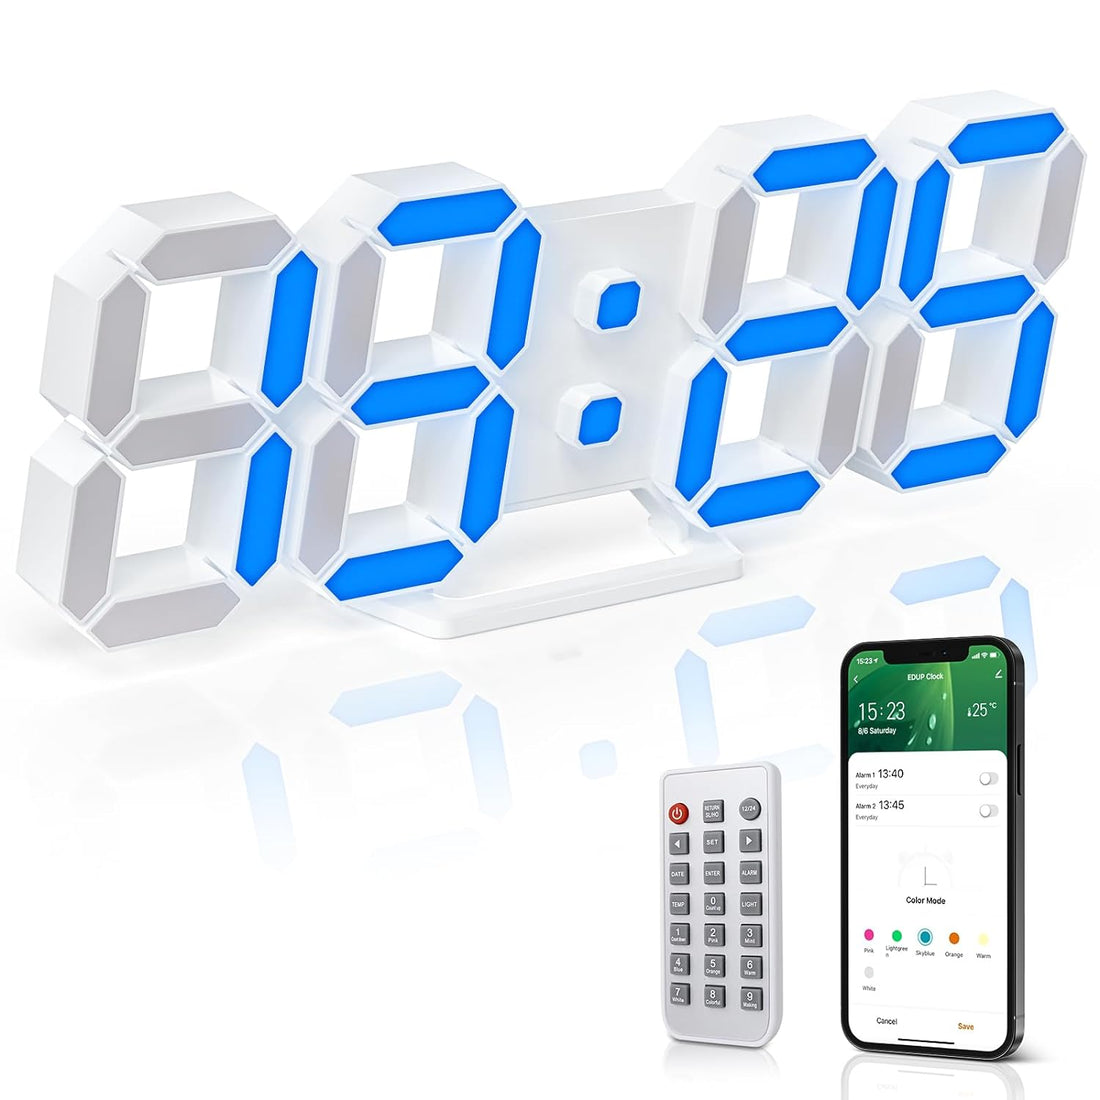 KWYDYP RGB 3D Digital Alarm Clock with 7 Colors, Time Sync, Upgraded APP/Remote Control, 9.7" LED Wall Clock Desk Clocks for Bedrooms, Timer/5-Level Brightness/Night Light/Time/Date/Temperature